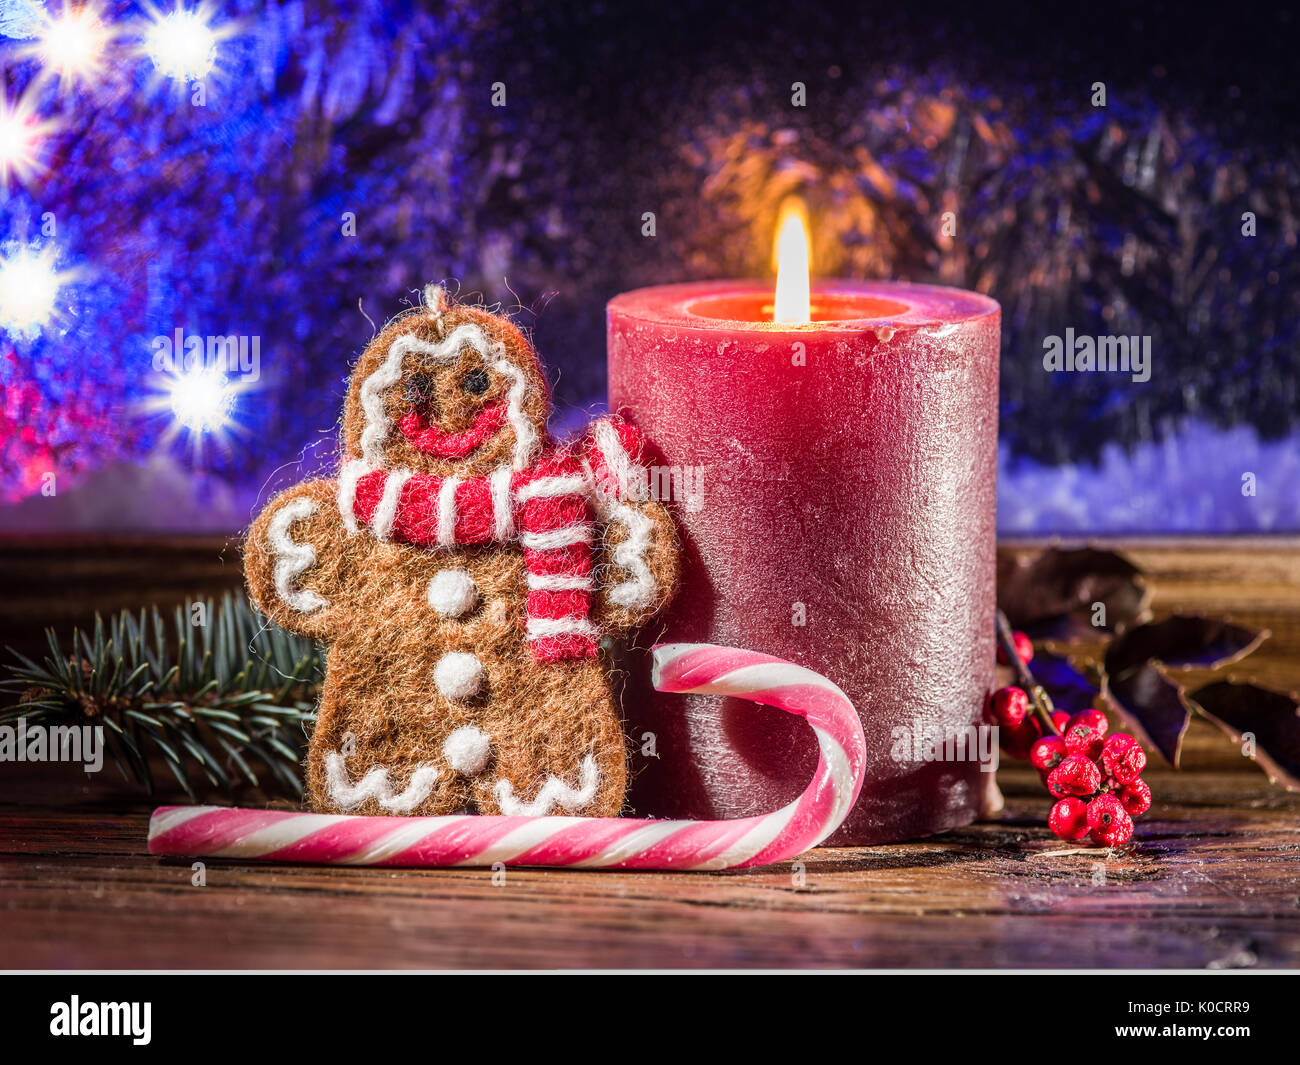 Christmas candle, ginger man toy and candy canes. Christmas symbols. Stock Photo